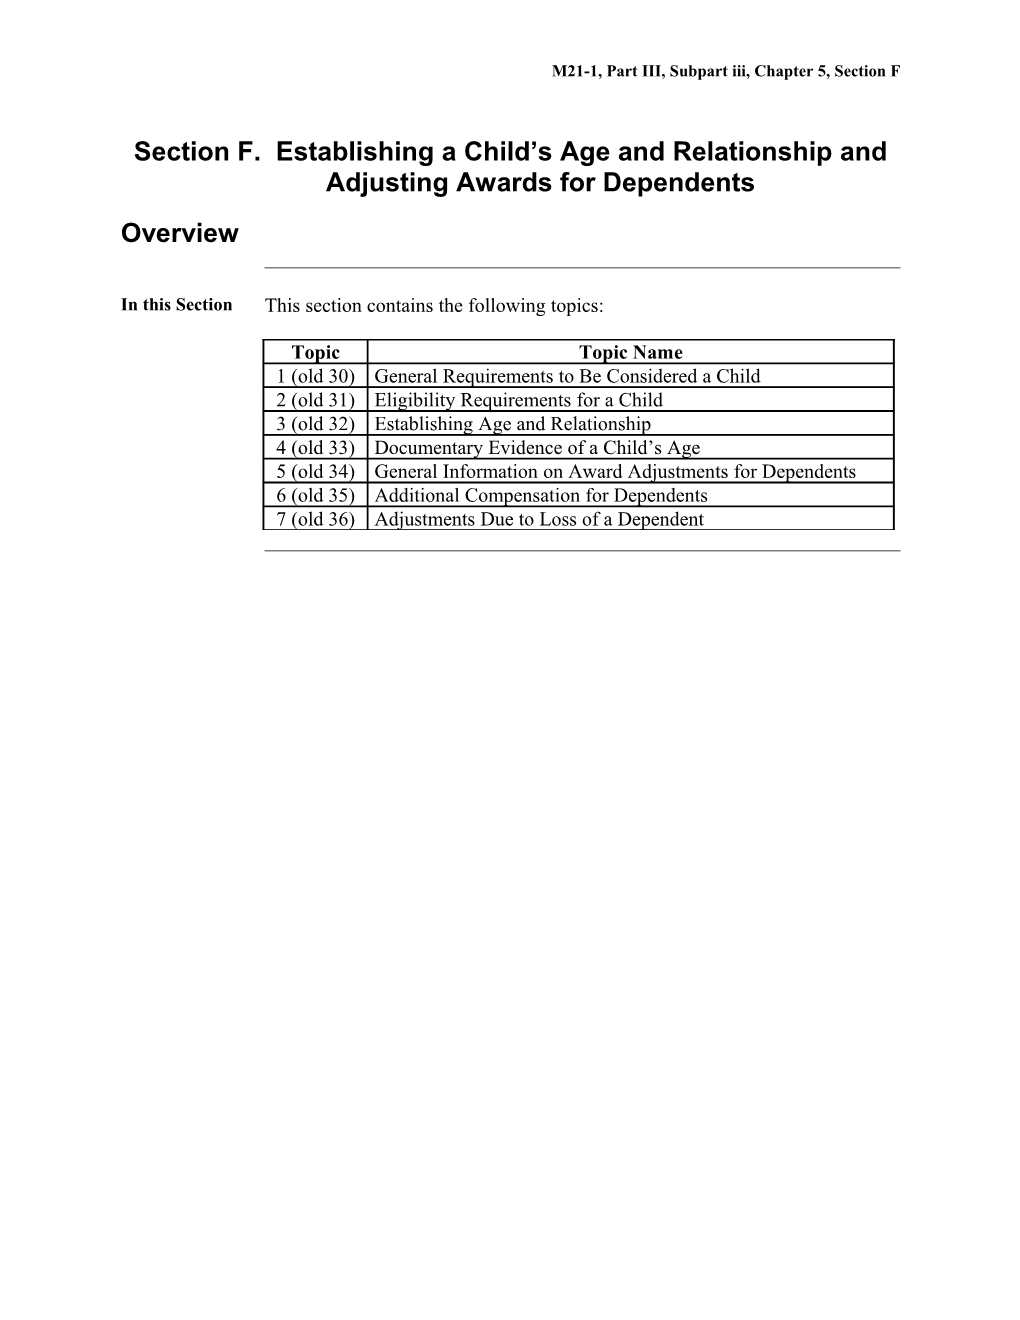 Establishing a Child's Age and Relationship and Adjusting Awards for Dependents (U.S. Department